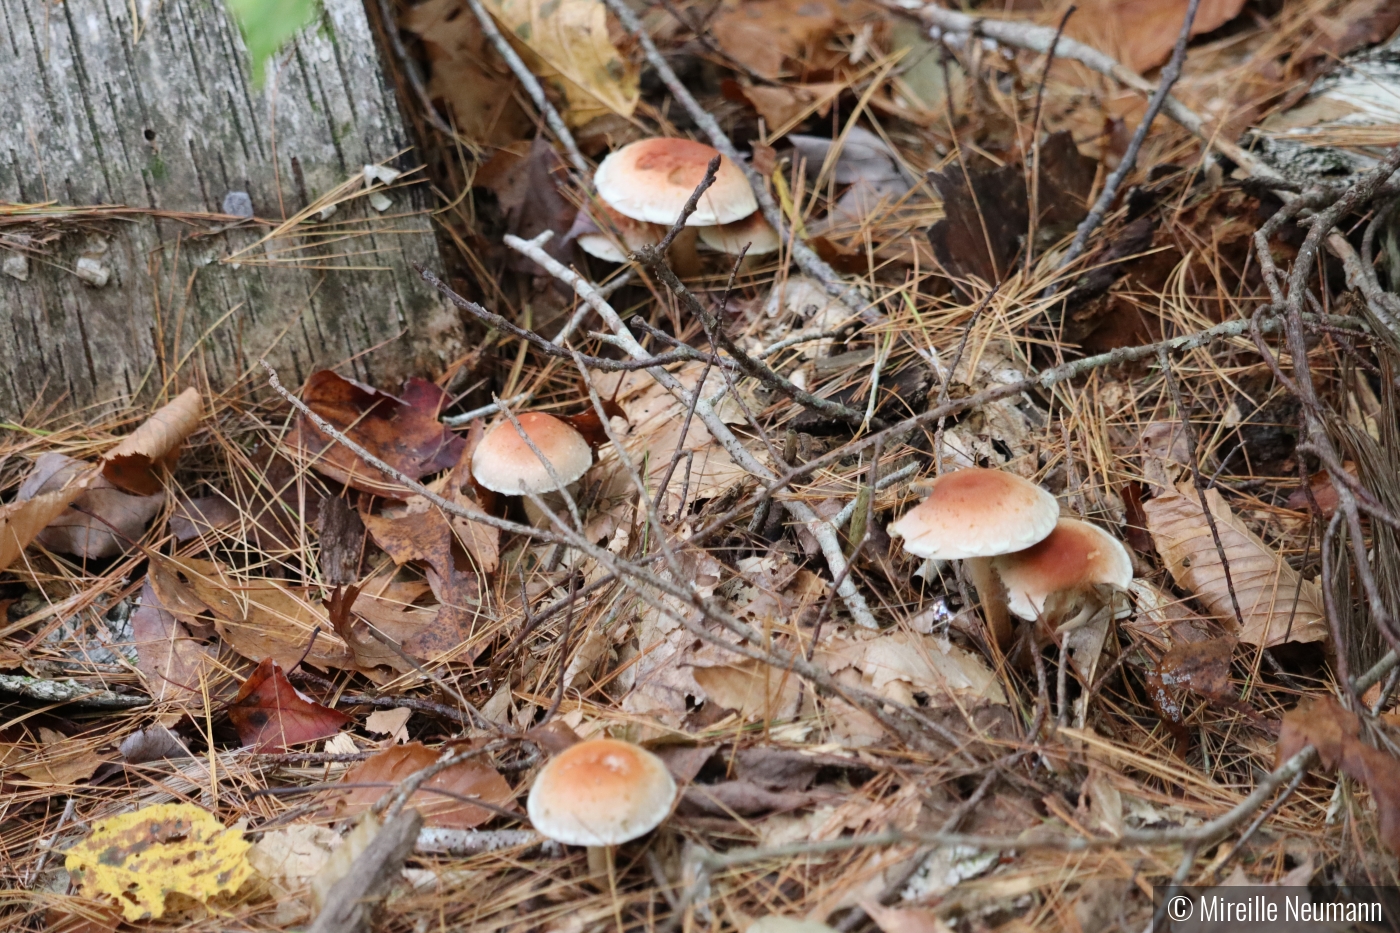 Mushrooms in the woods of New Hampshire by Mireille Neumann